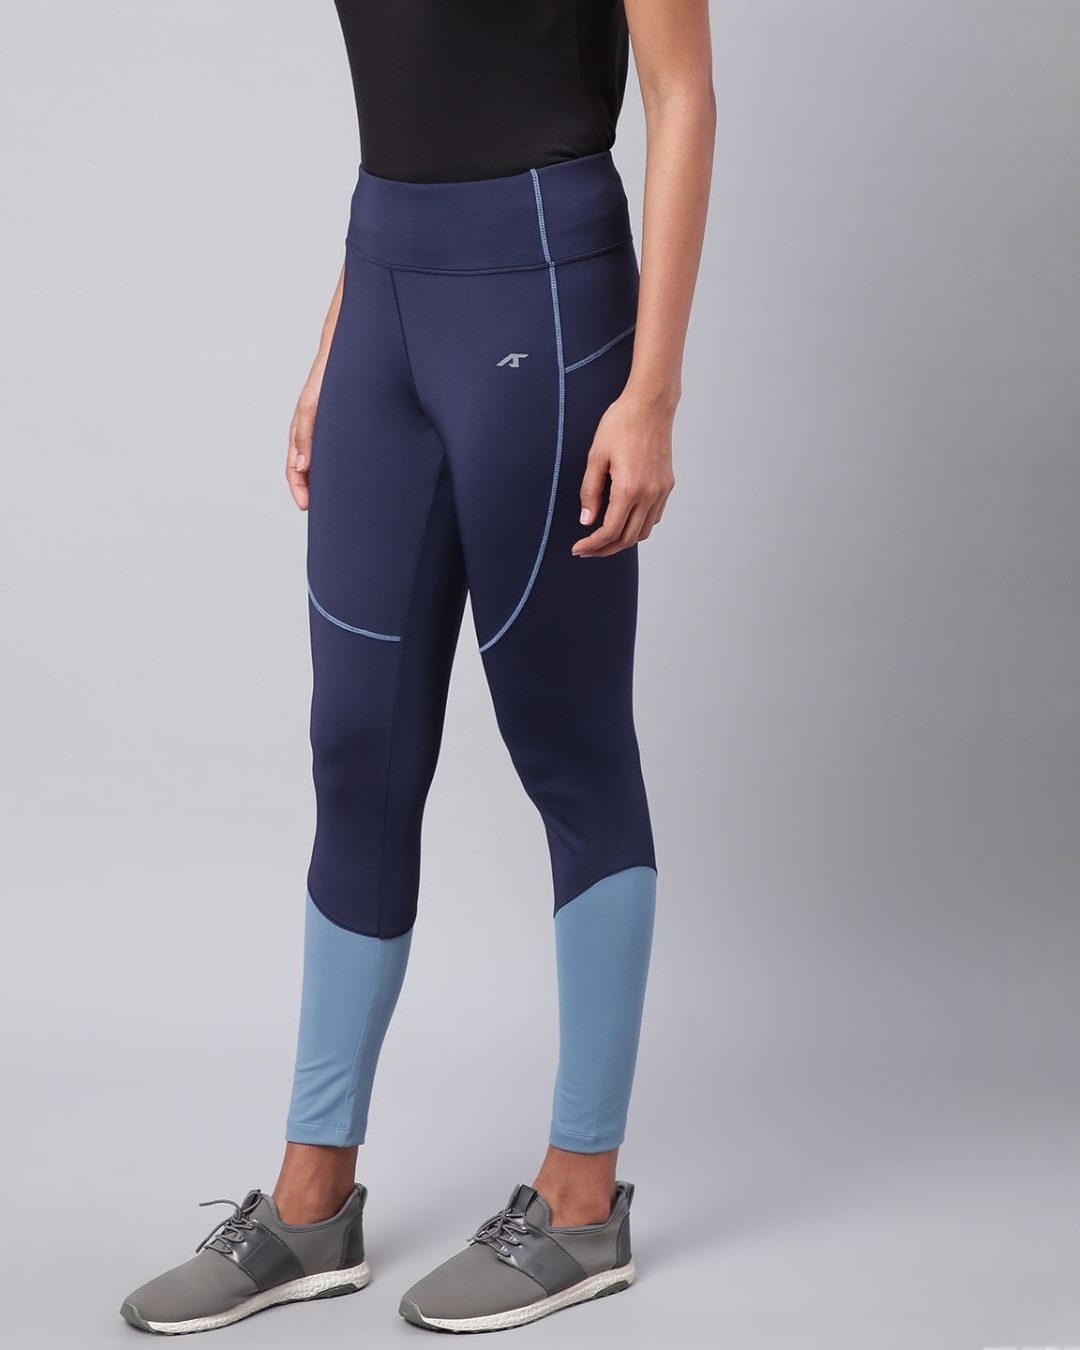 Shop Women Navy Blue Secure Fit Colourblocked Cropped Training Tights-Design